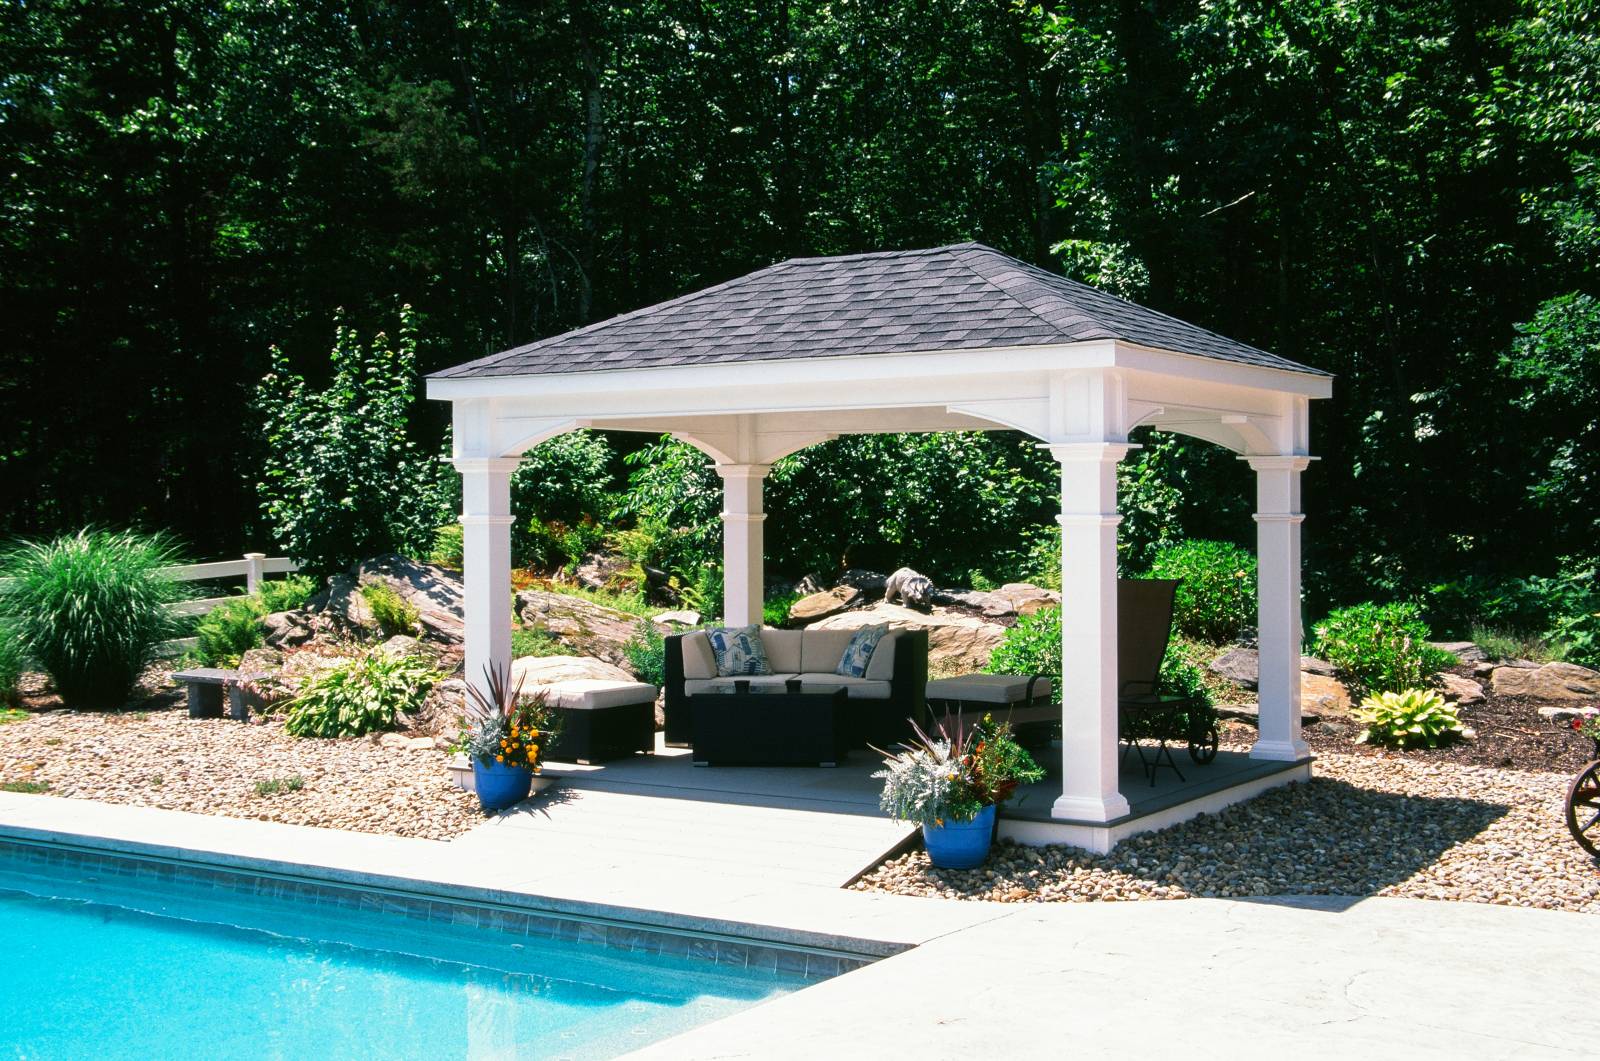 10' x 14' Ridgefield Pavilion Shown with Options